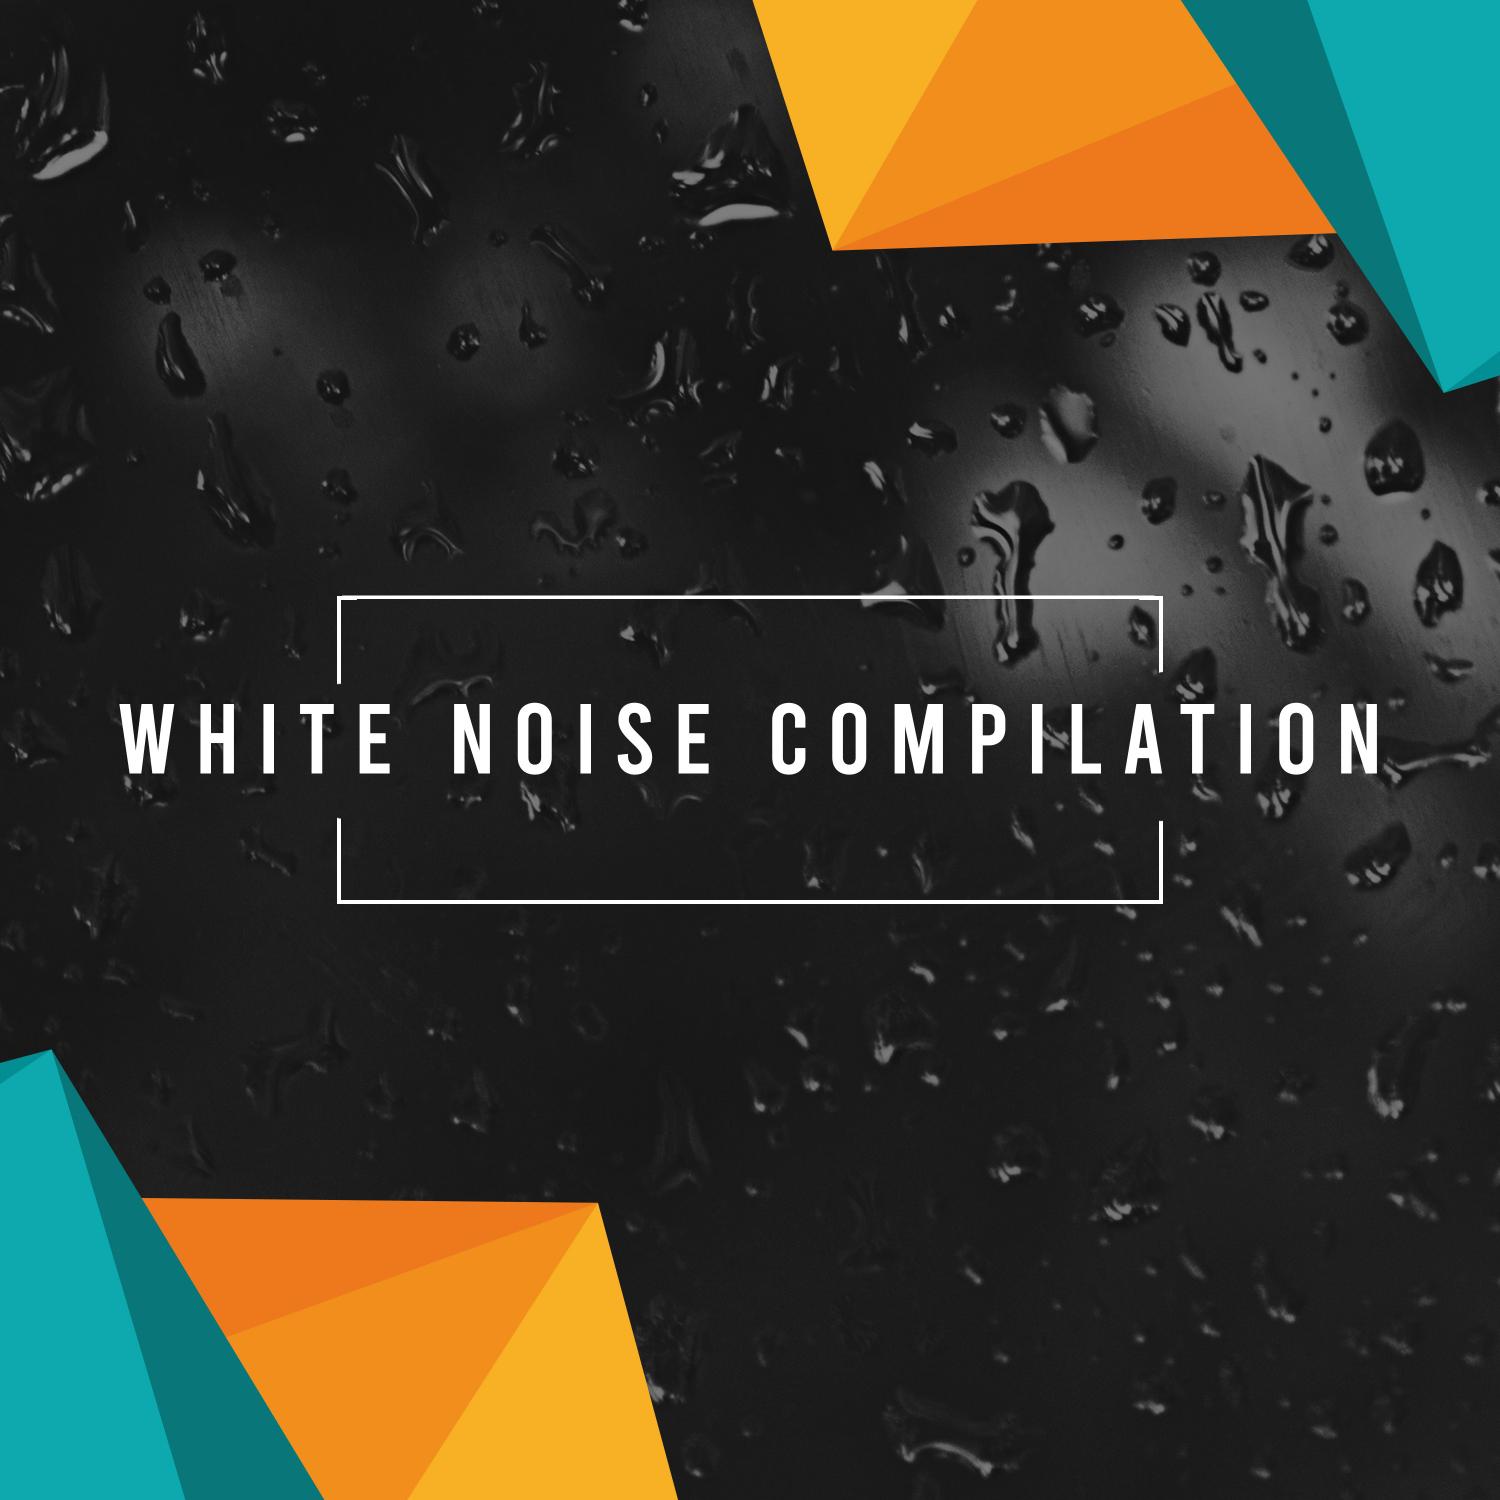 2017 Best Sleep and White Noise Compilation